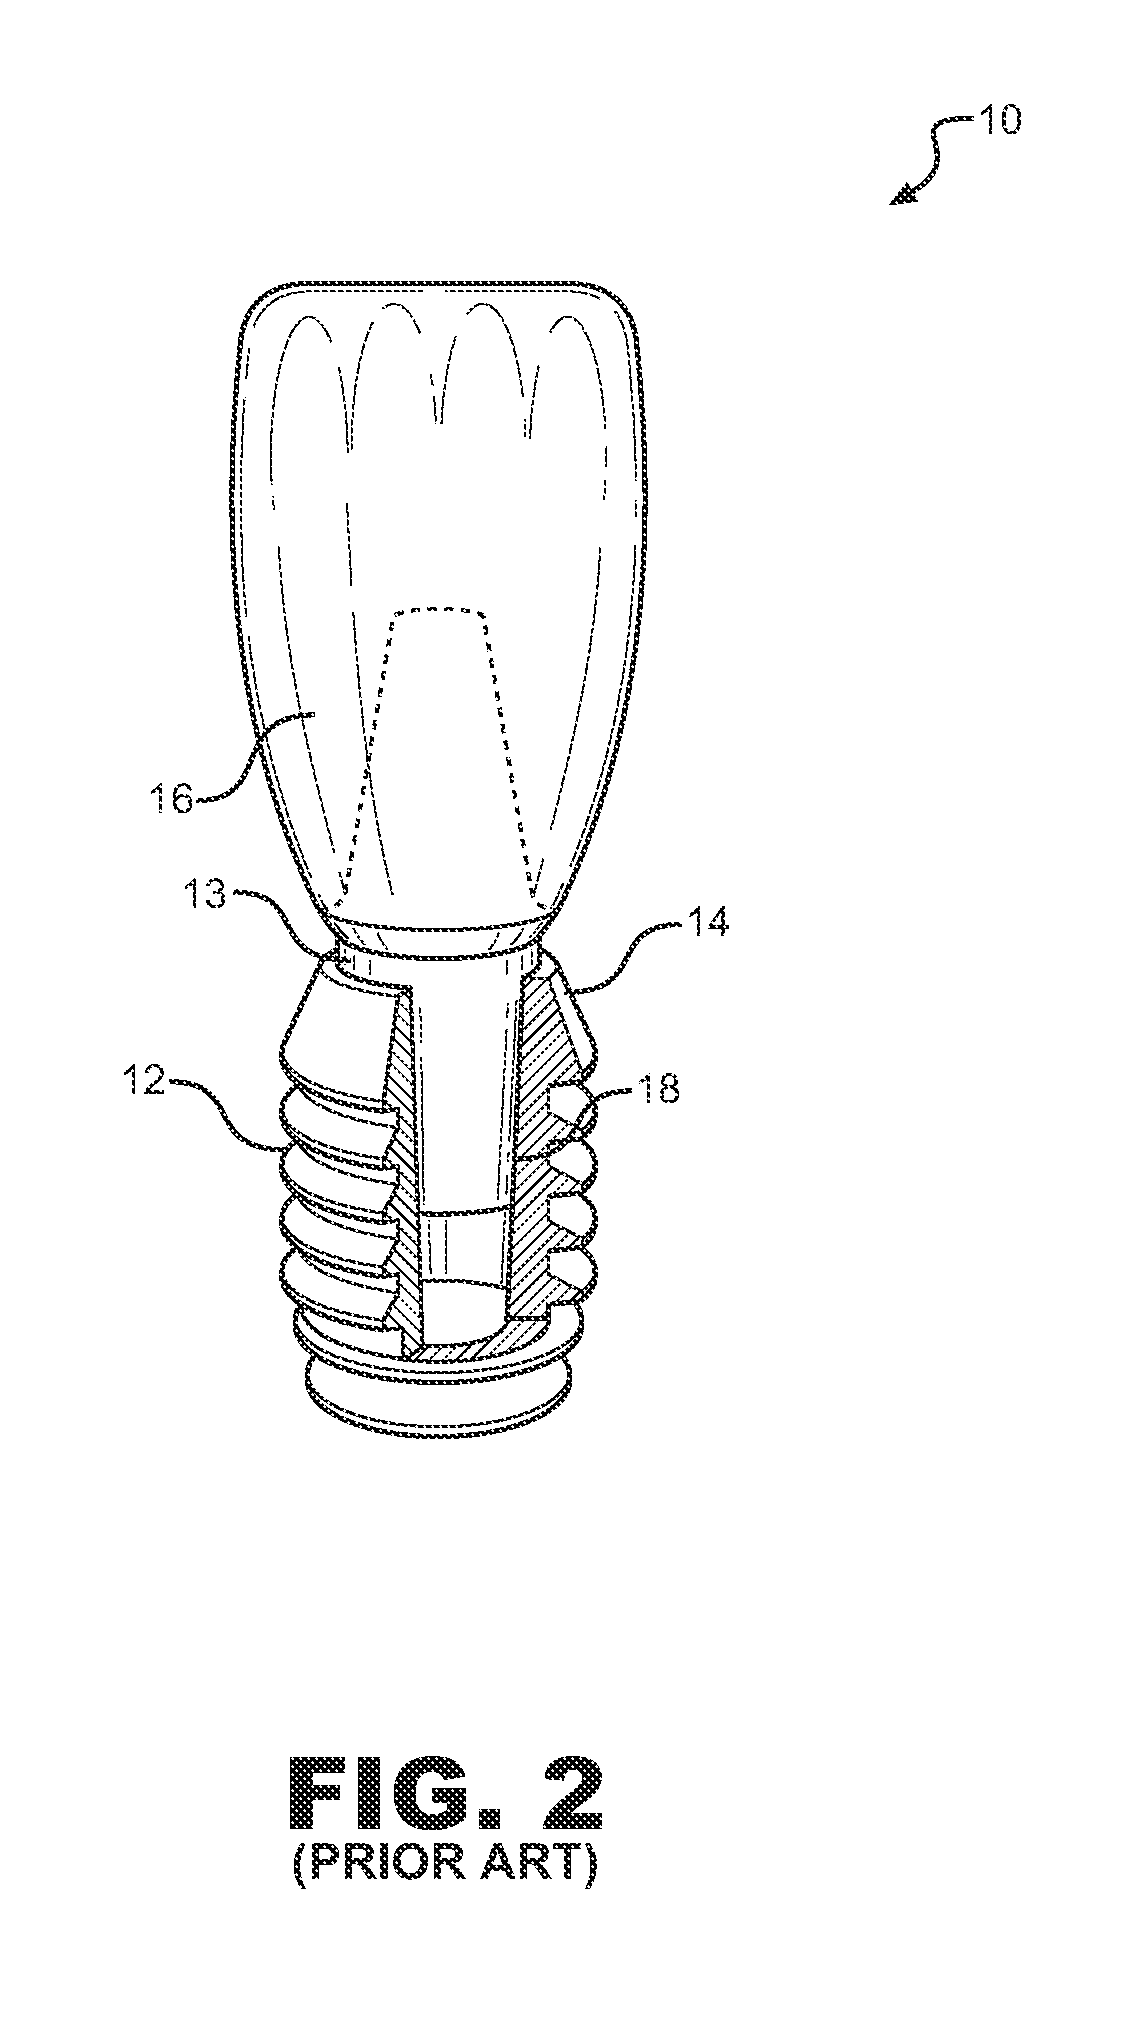 Dental Implant System and Method of Use